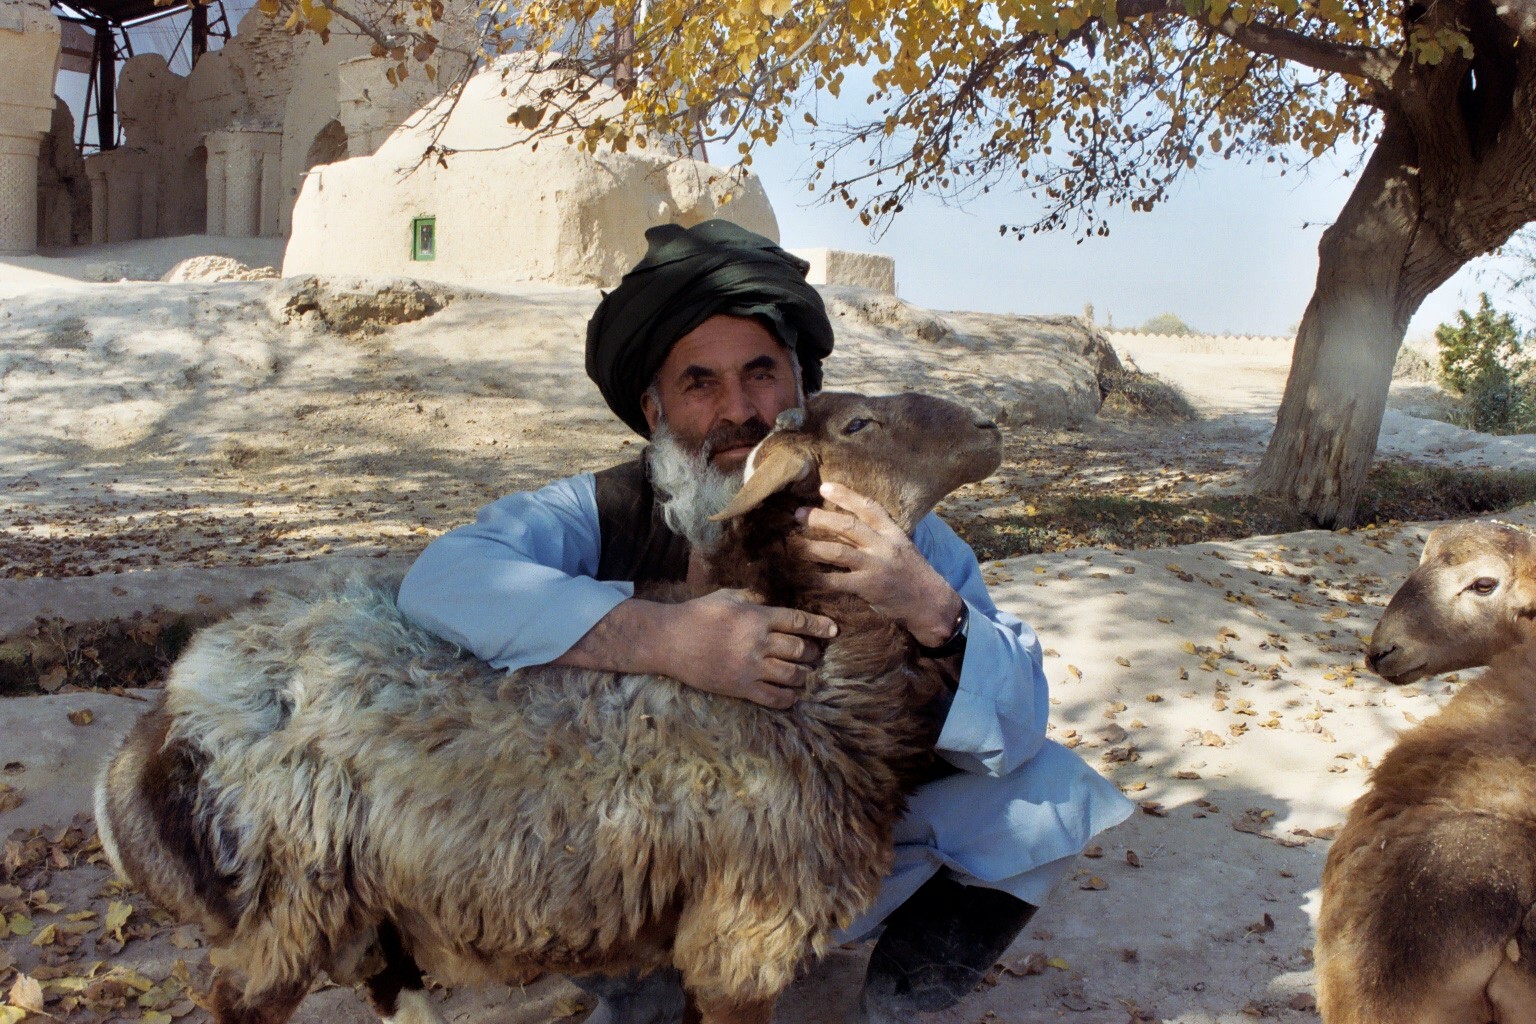 A man keeps watch over his sheep and the ruins of a 9th Century mosque near Balkh, Afghanistan. Article on Afghanistan in the June 2008 issue of National Geographic